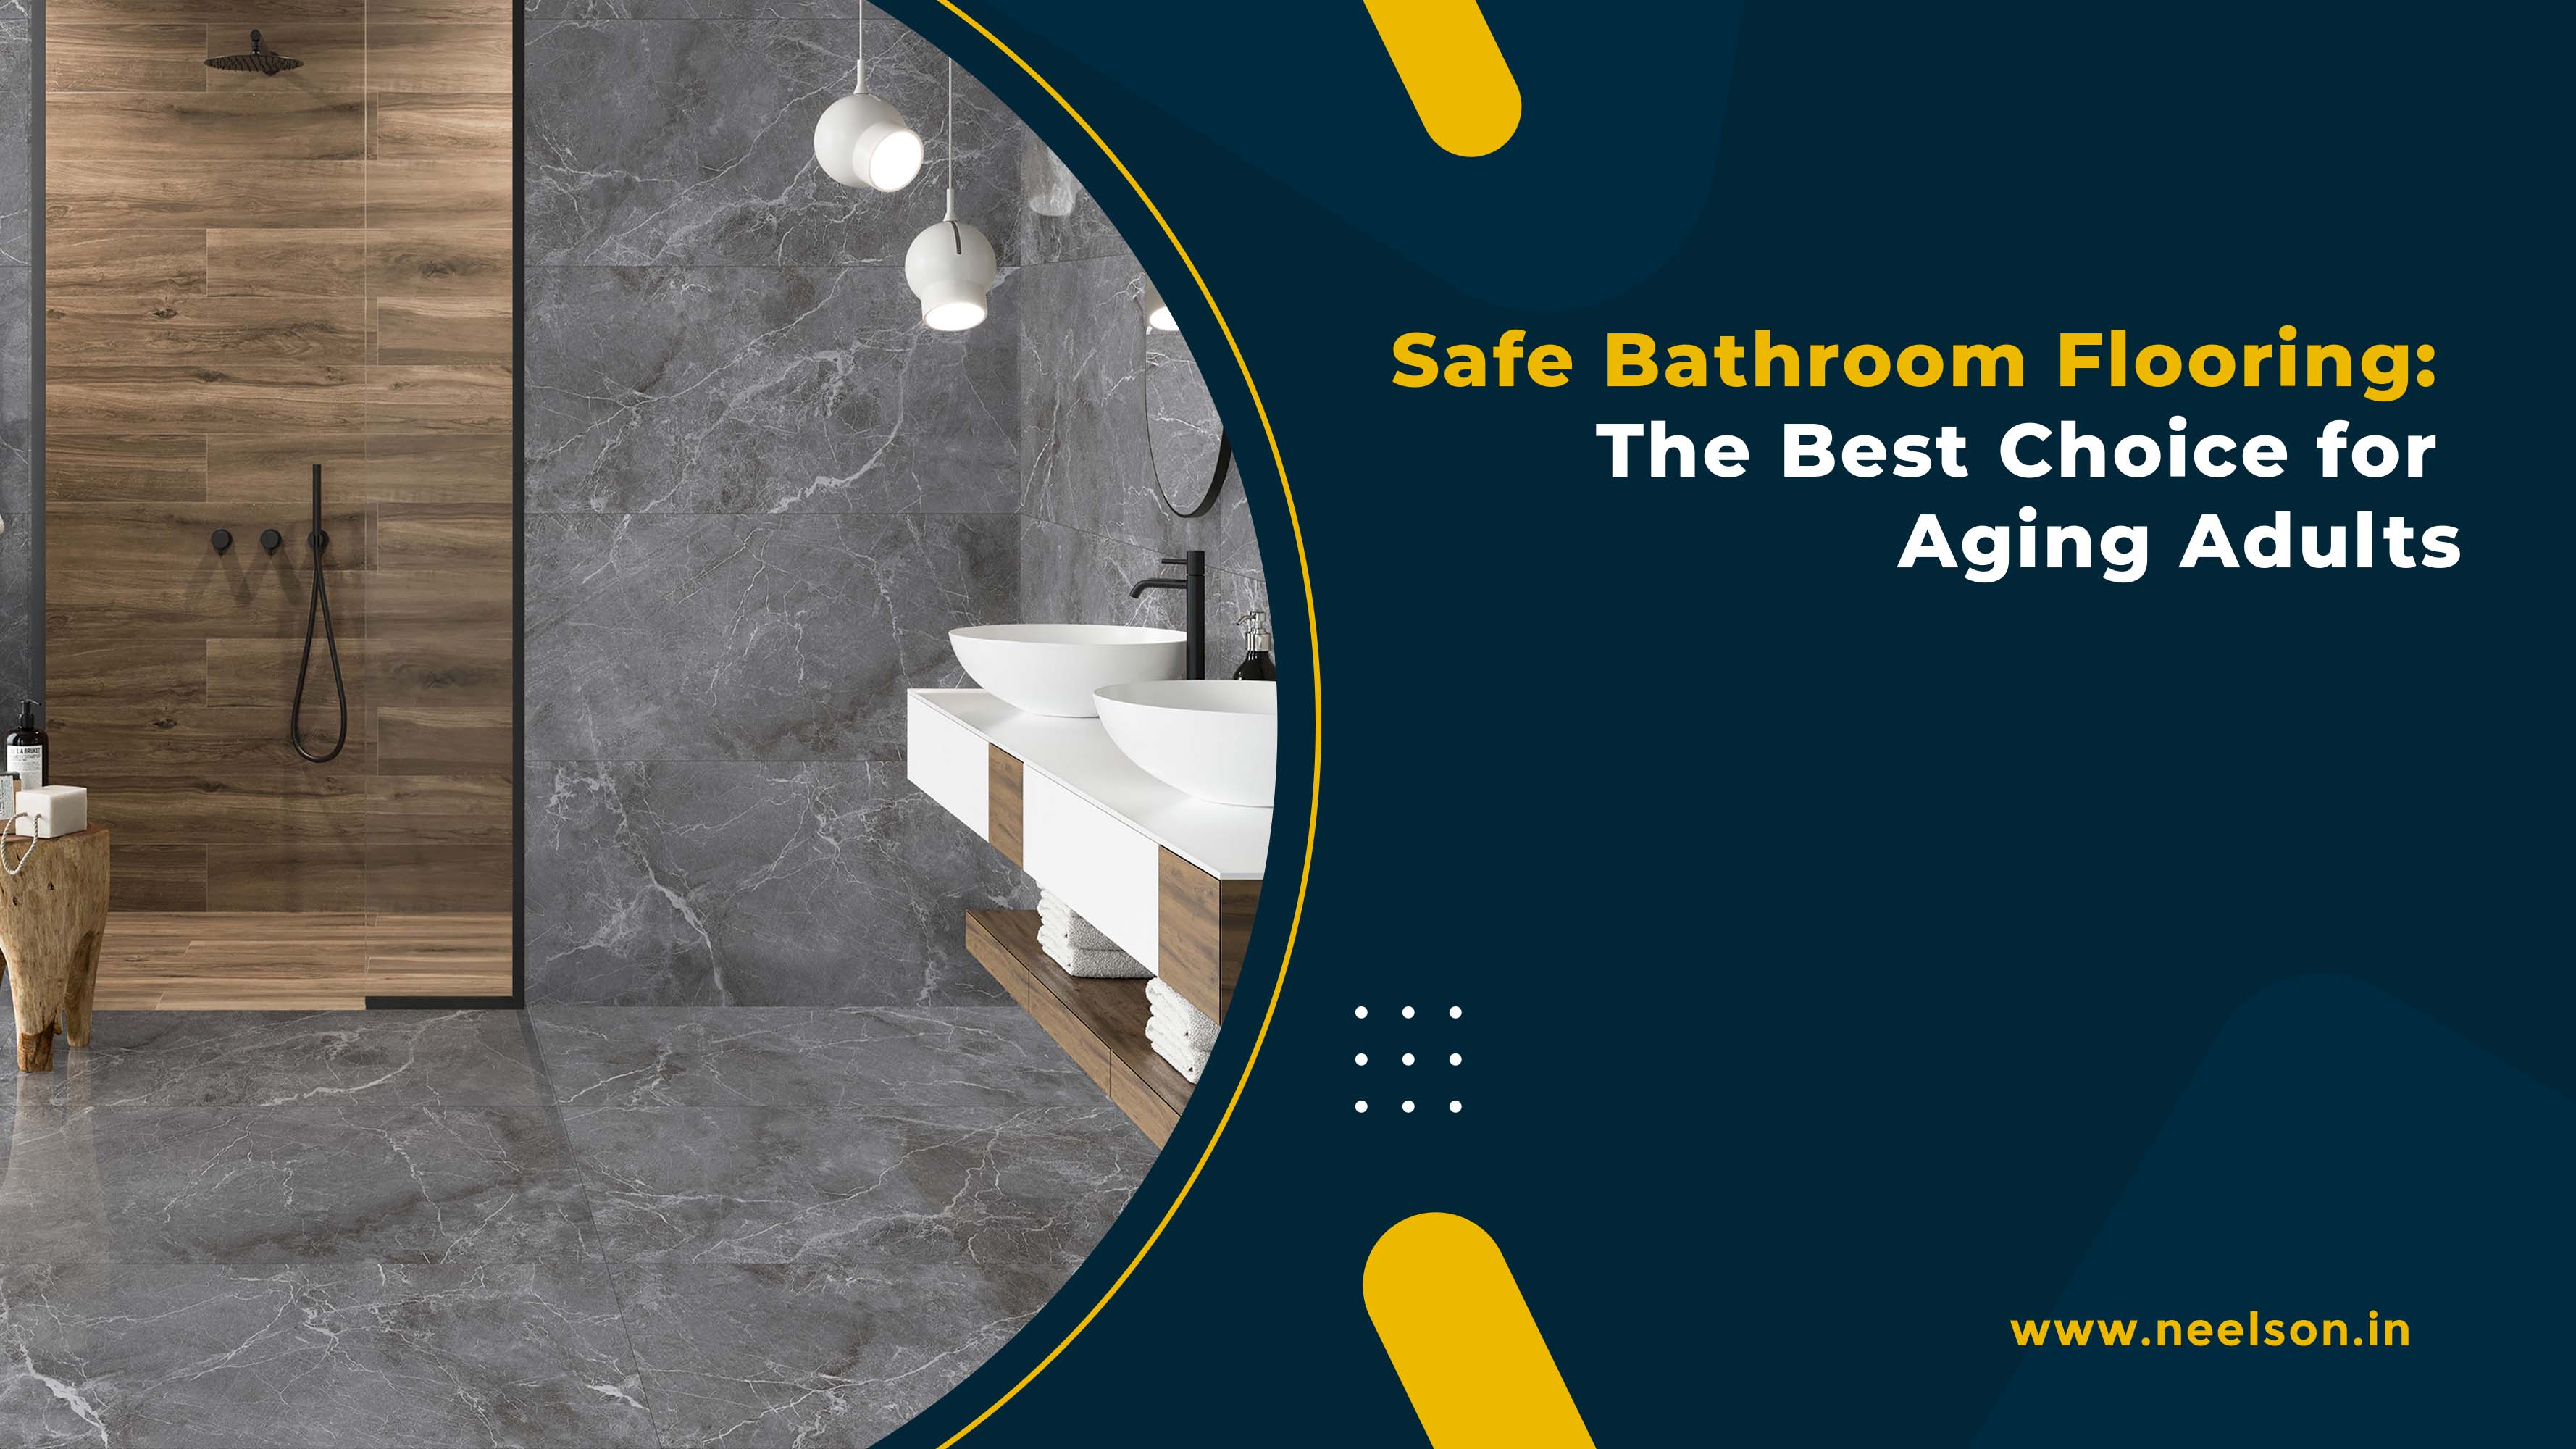 Safe Bathroom Flooring: The Best Choice for Aging Adults